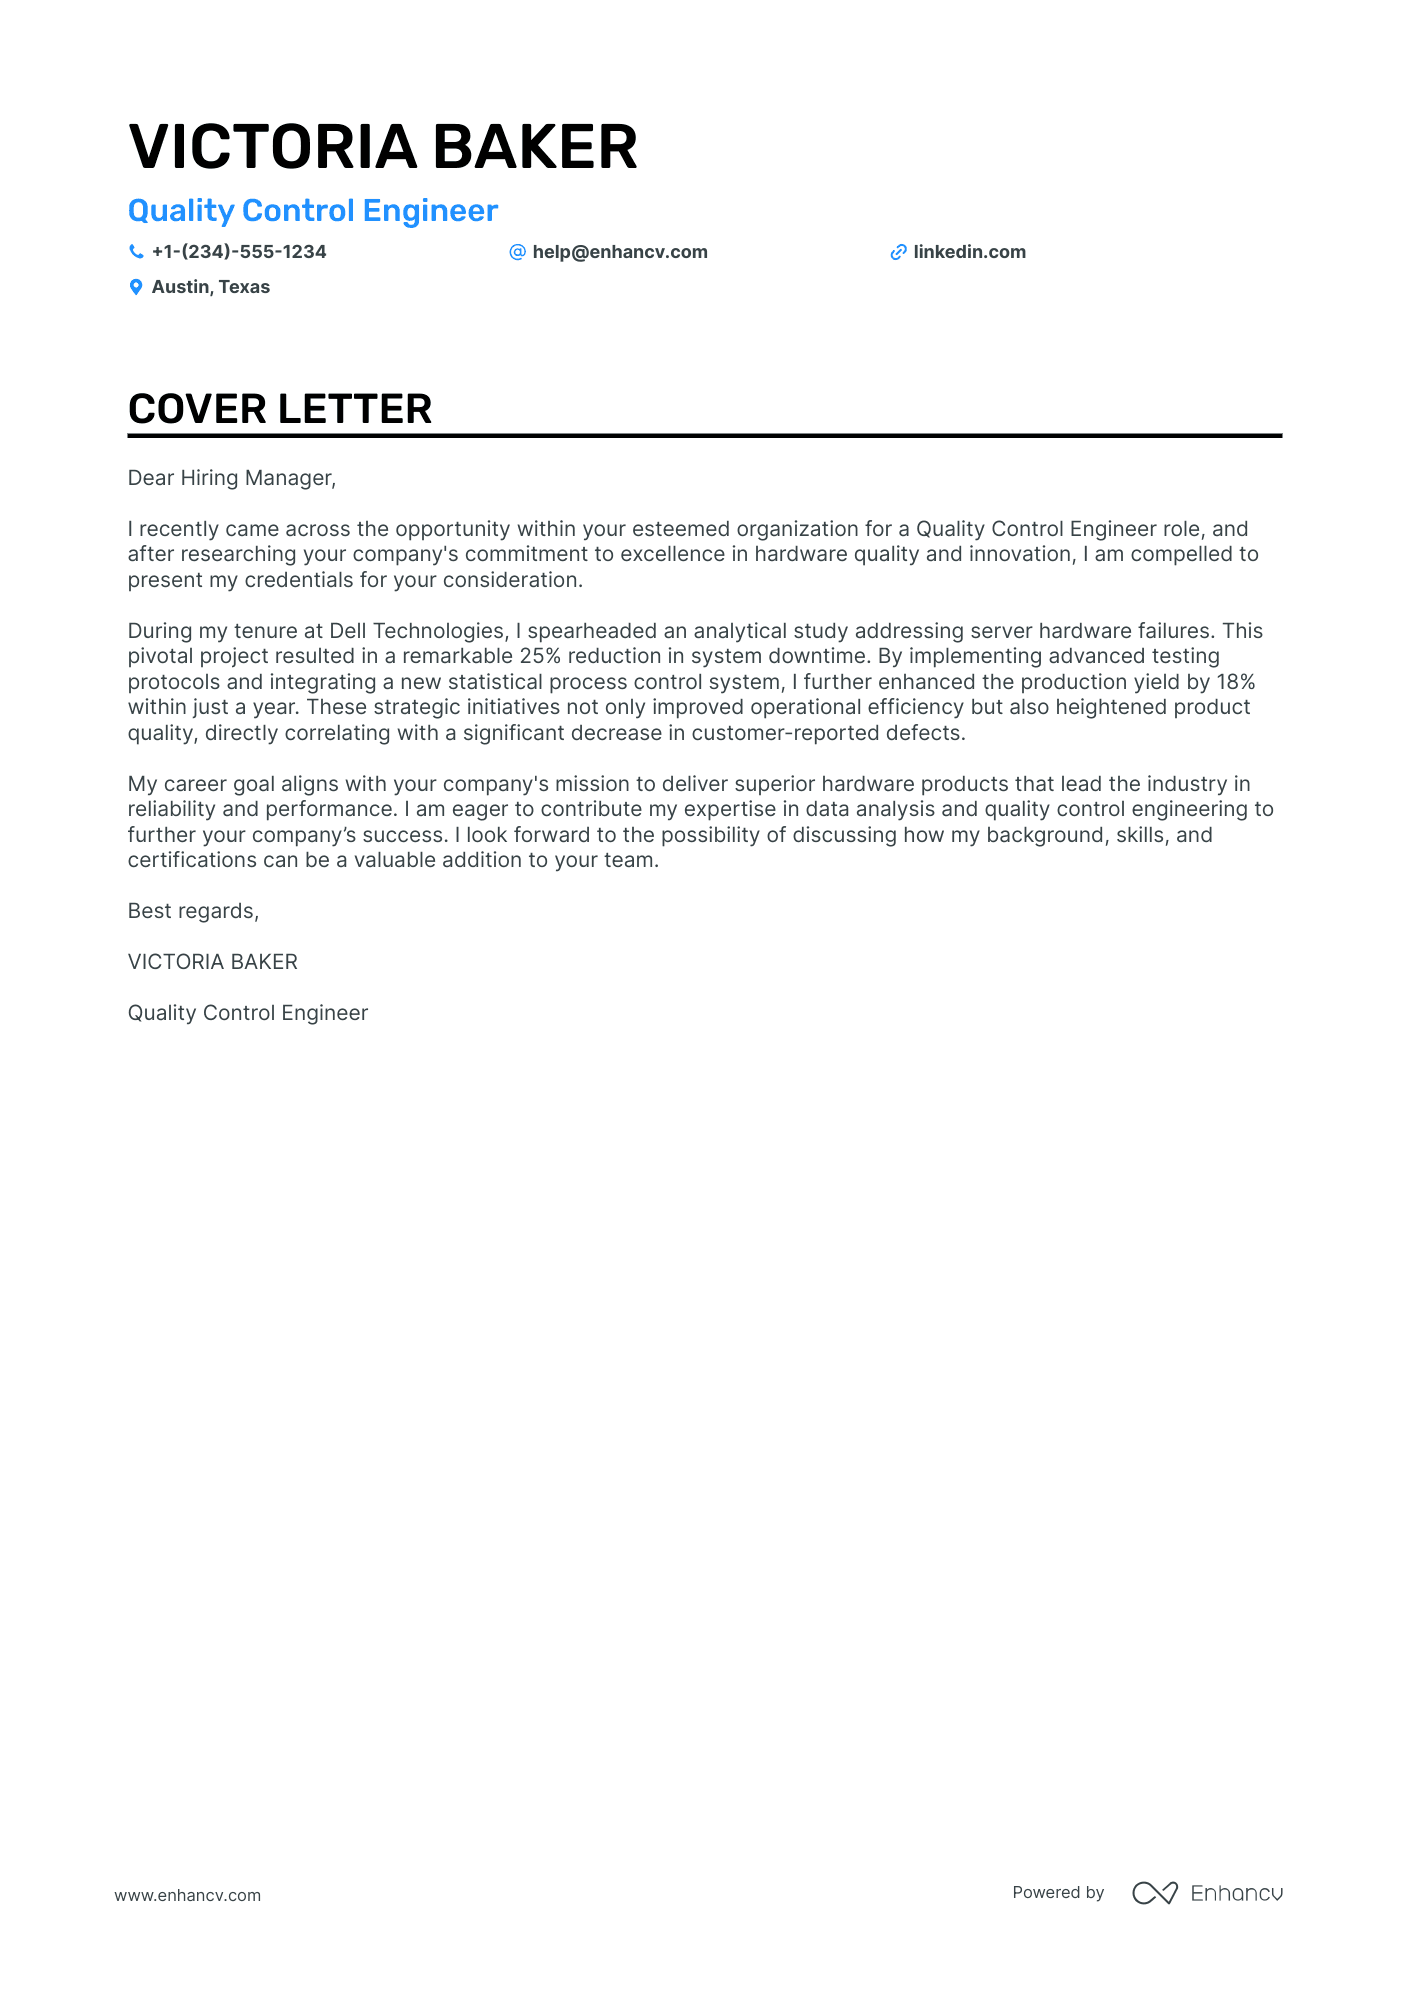 Quality Control Engineer cover letter